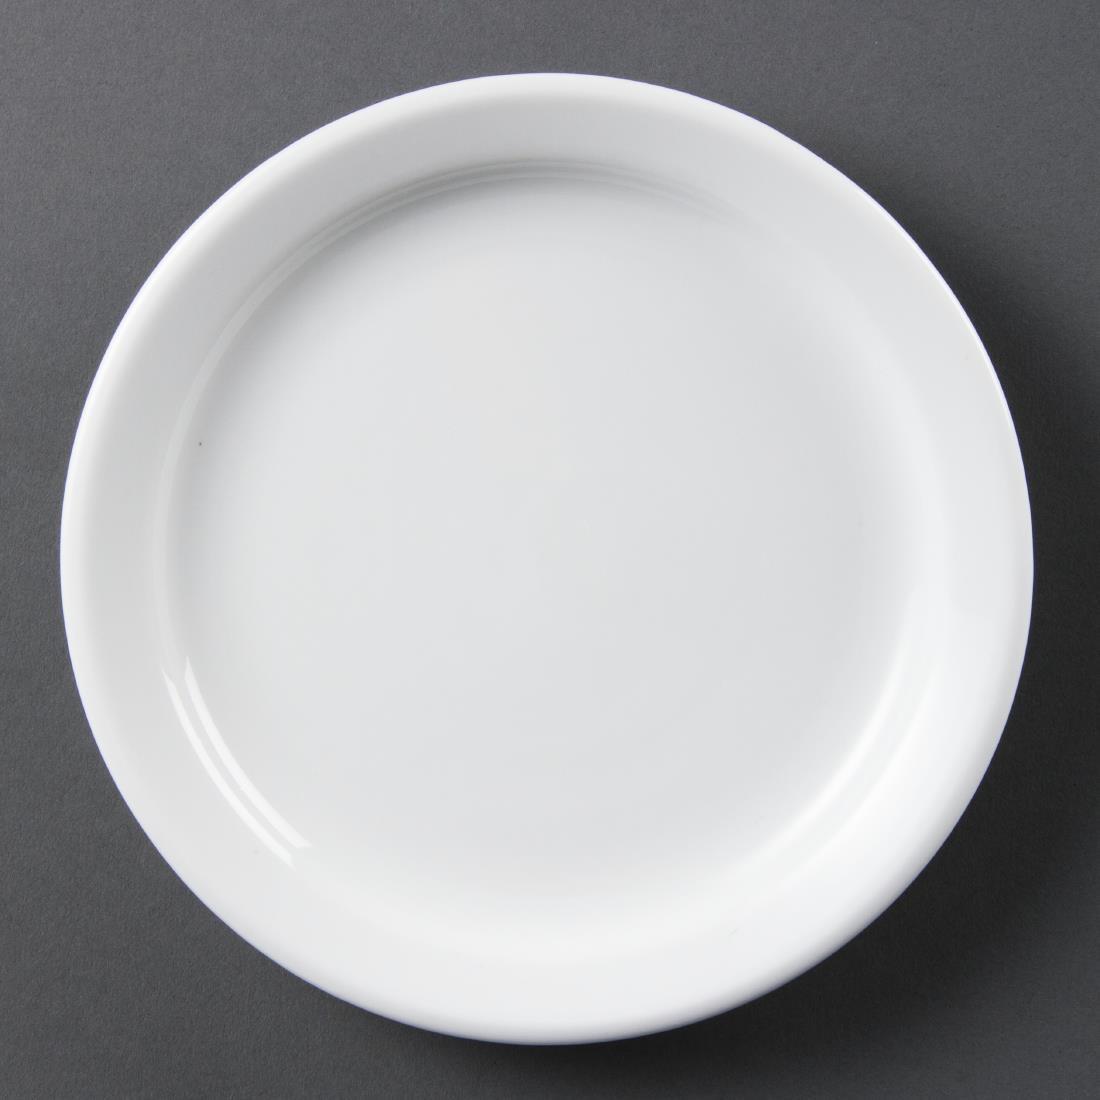 Olympia Whiteware Narrow Rimmed Plates 180mm (Pack of 12) - CB487  - 2